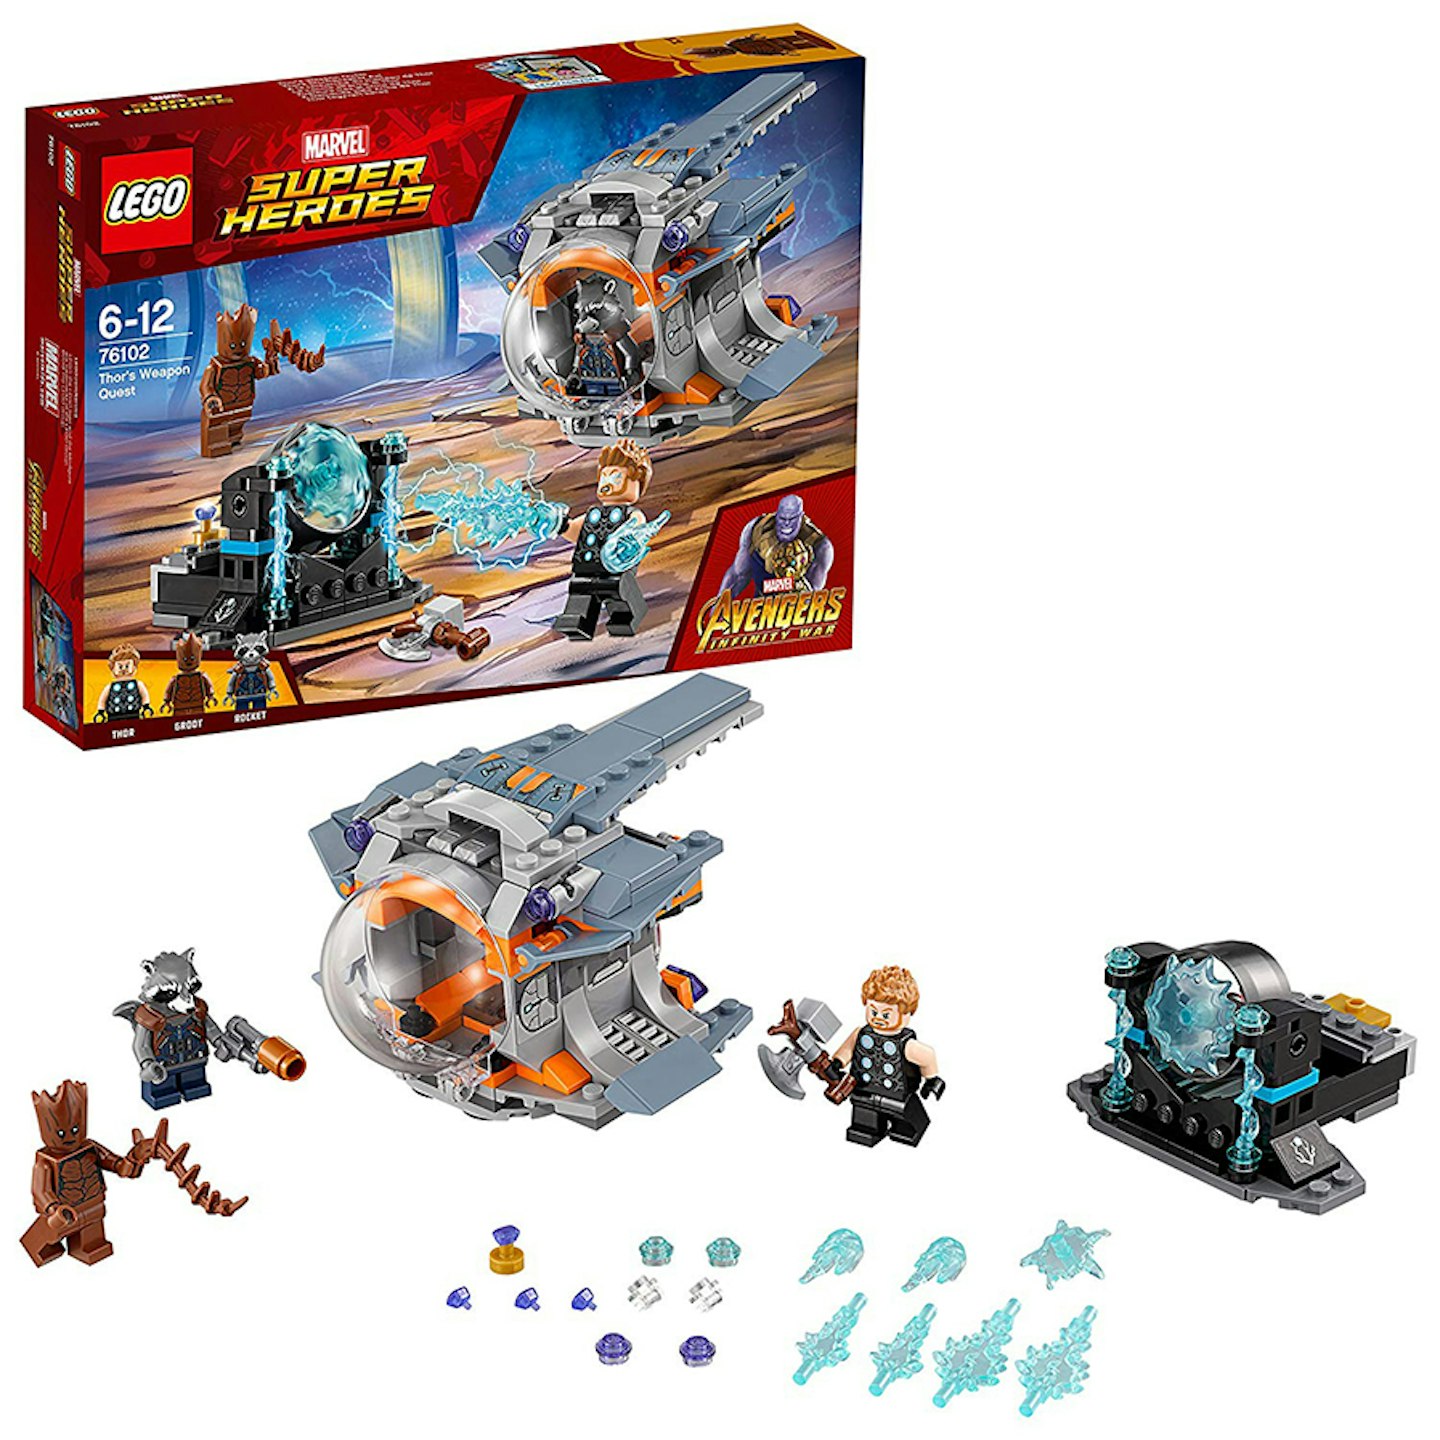 Lego Thoru2019s Weapon Quest Playset